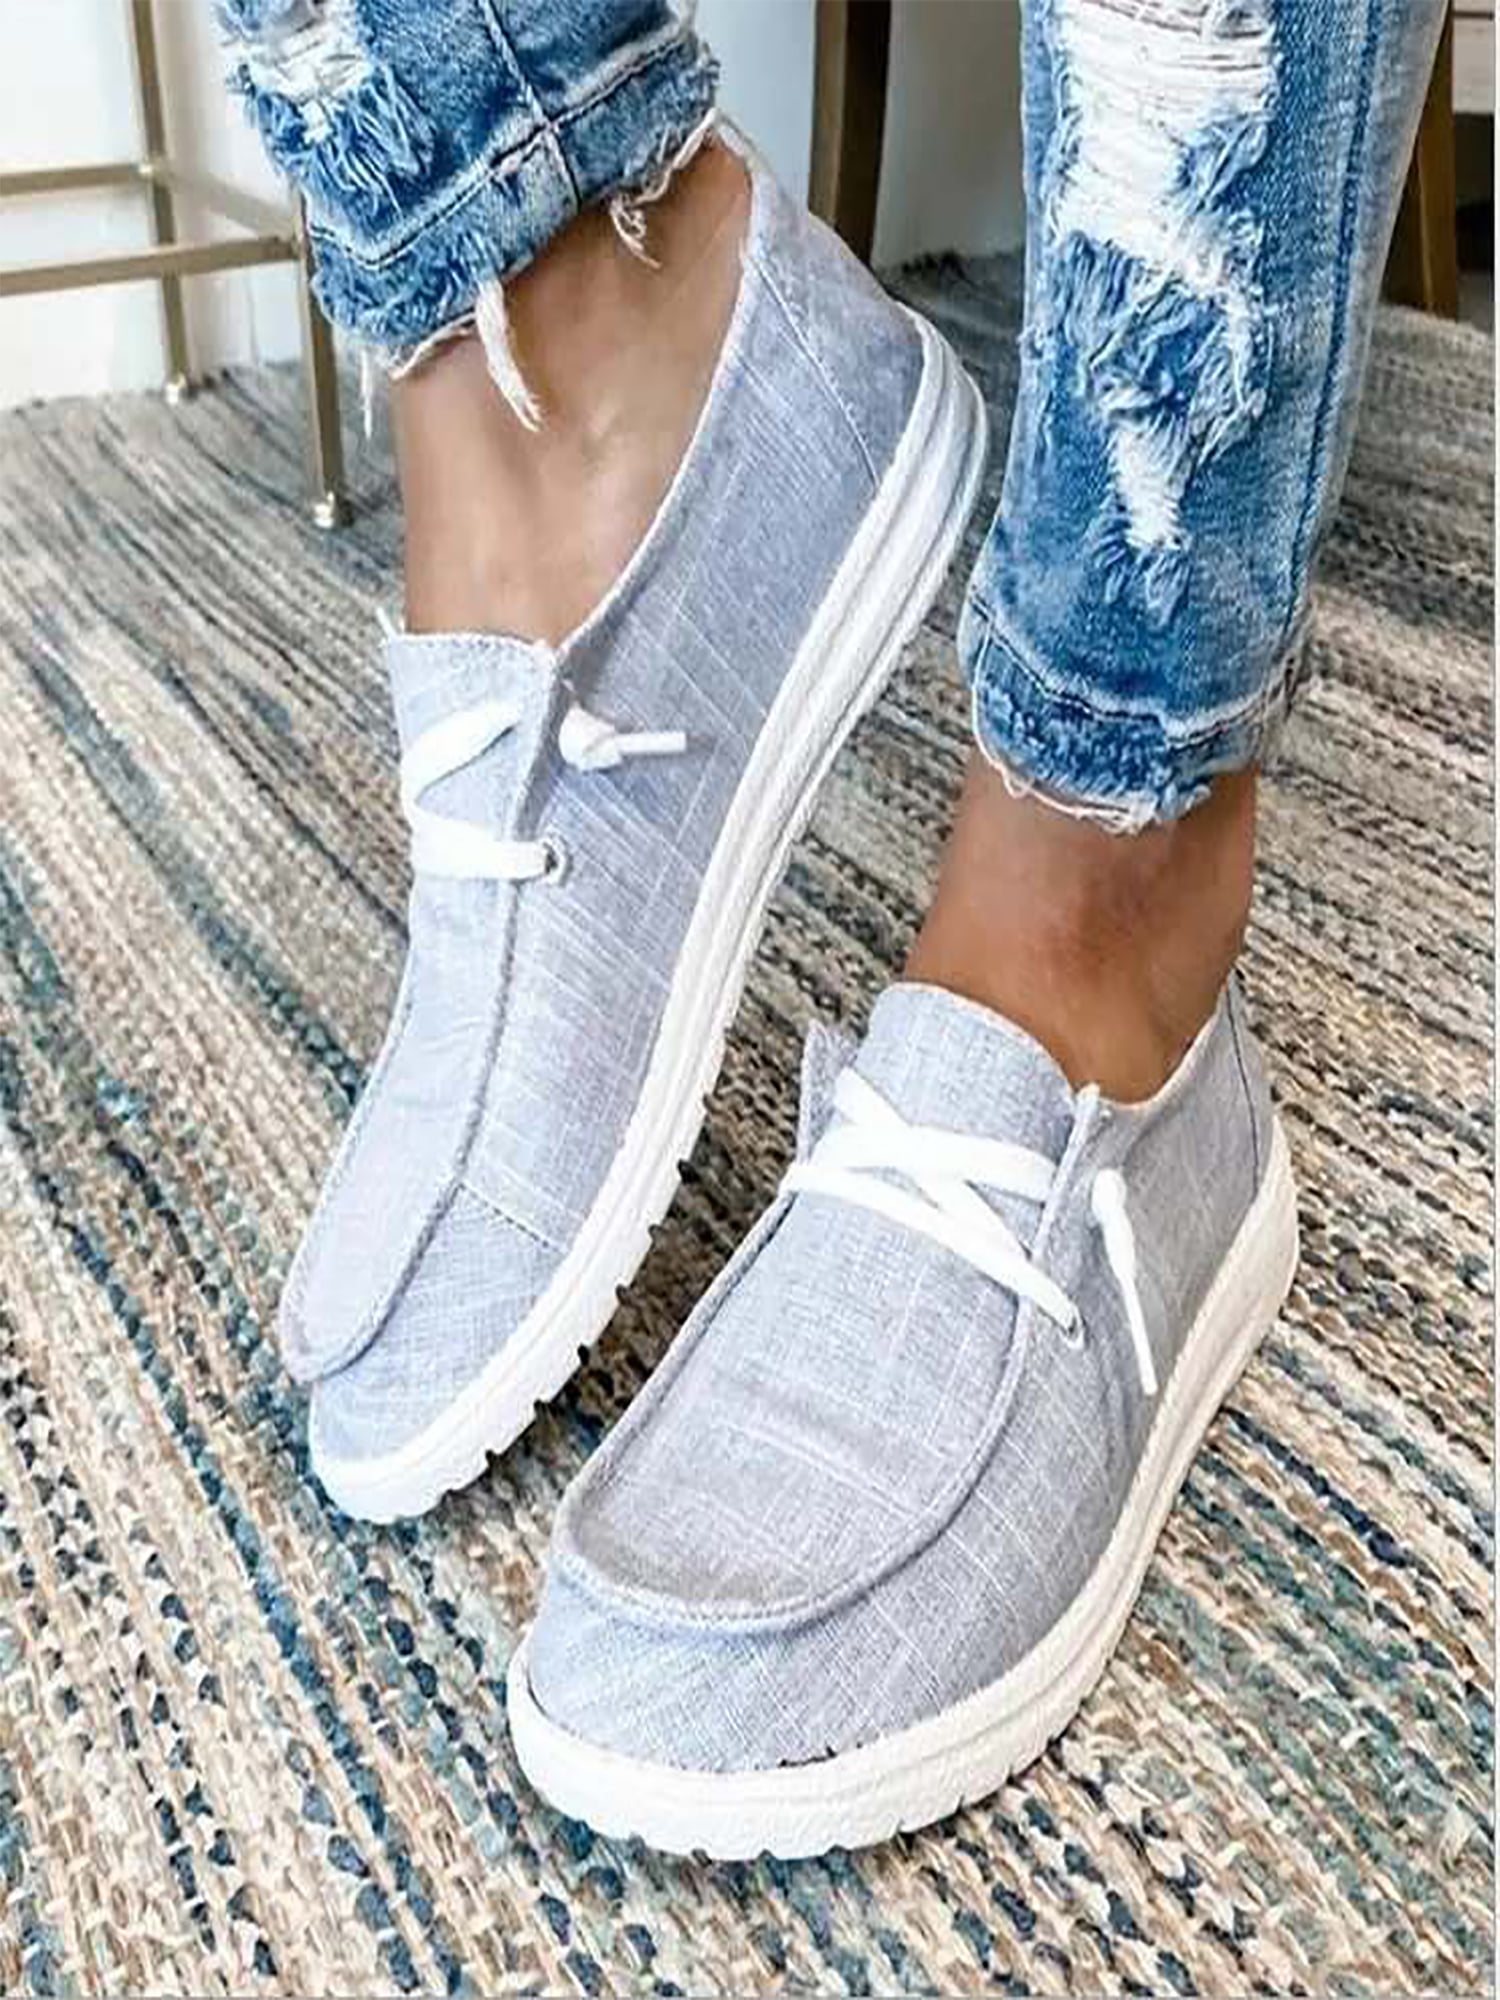 Women's Slip On Flat Denim Canvas Loafers Pumps Casual Trainers Sneakers Shoe 